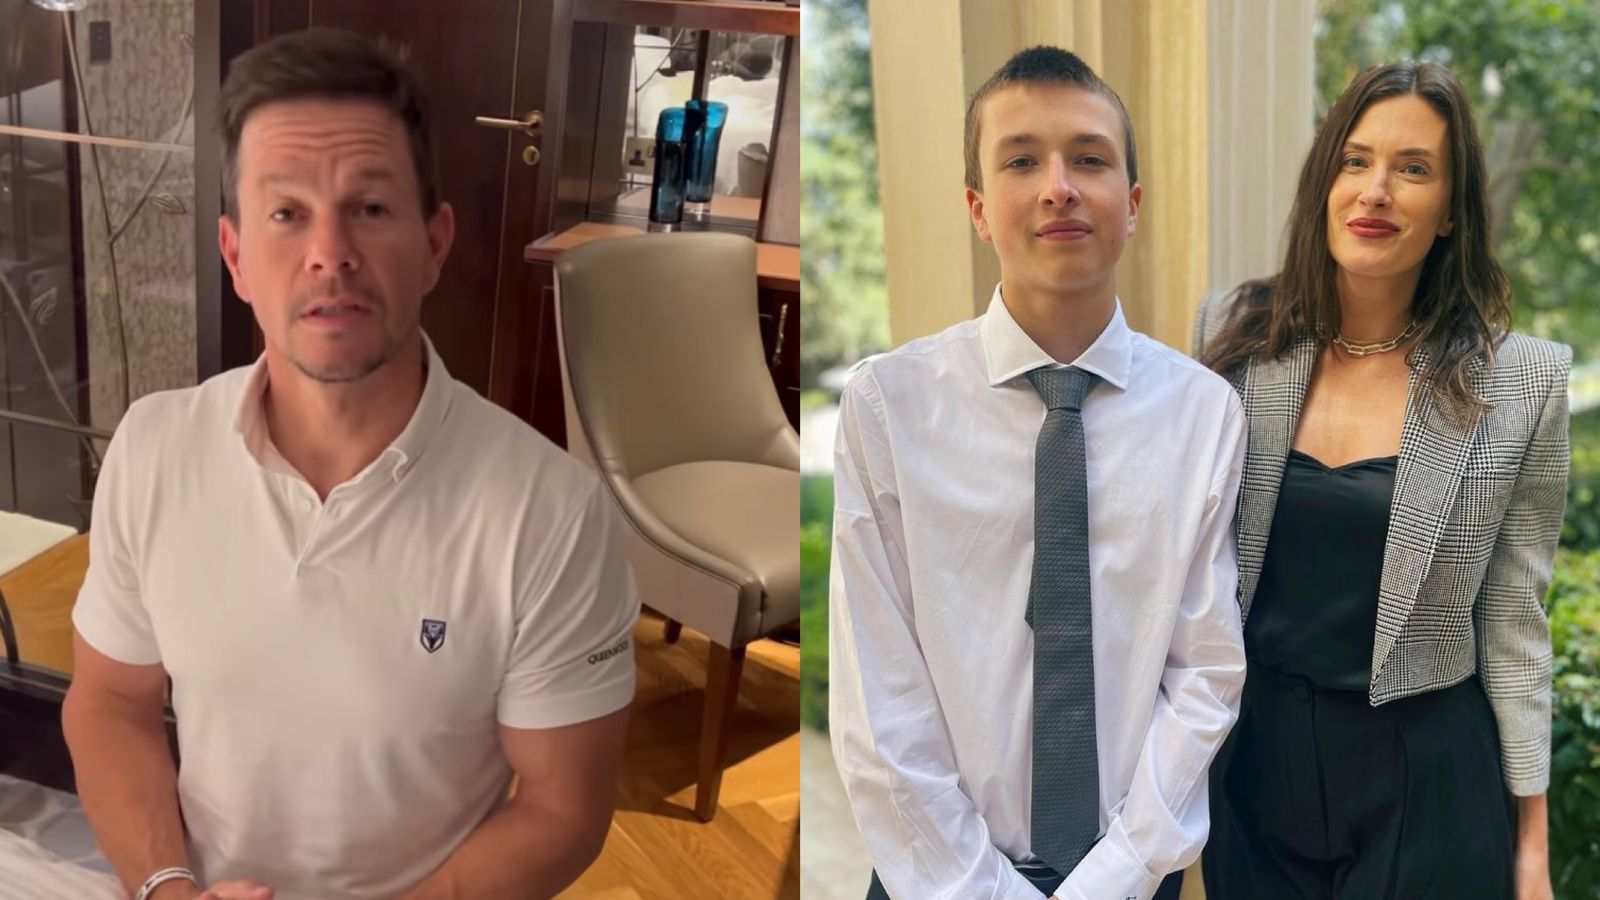 Mark Wahlberg Celebrates Teenage Son's Catholic Confirmation, Credits His Wife in Sweet Post